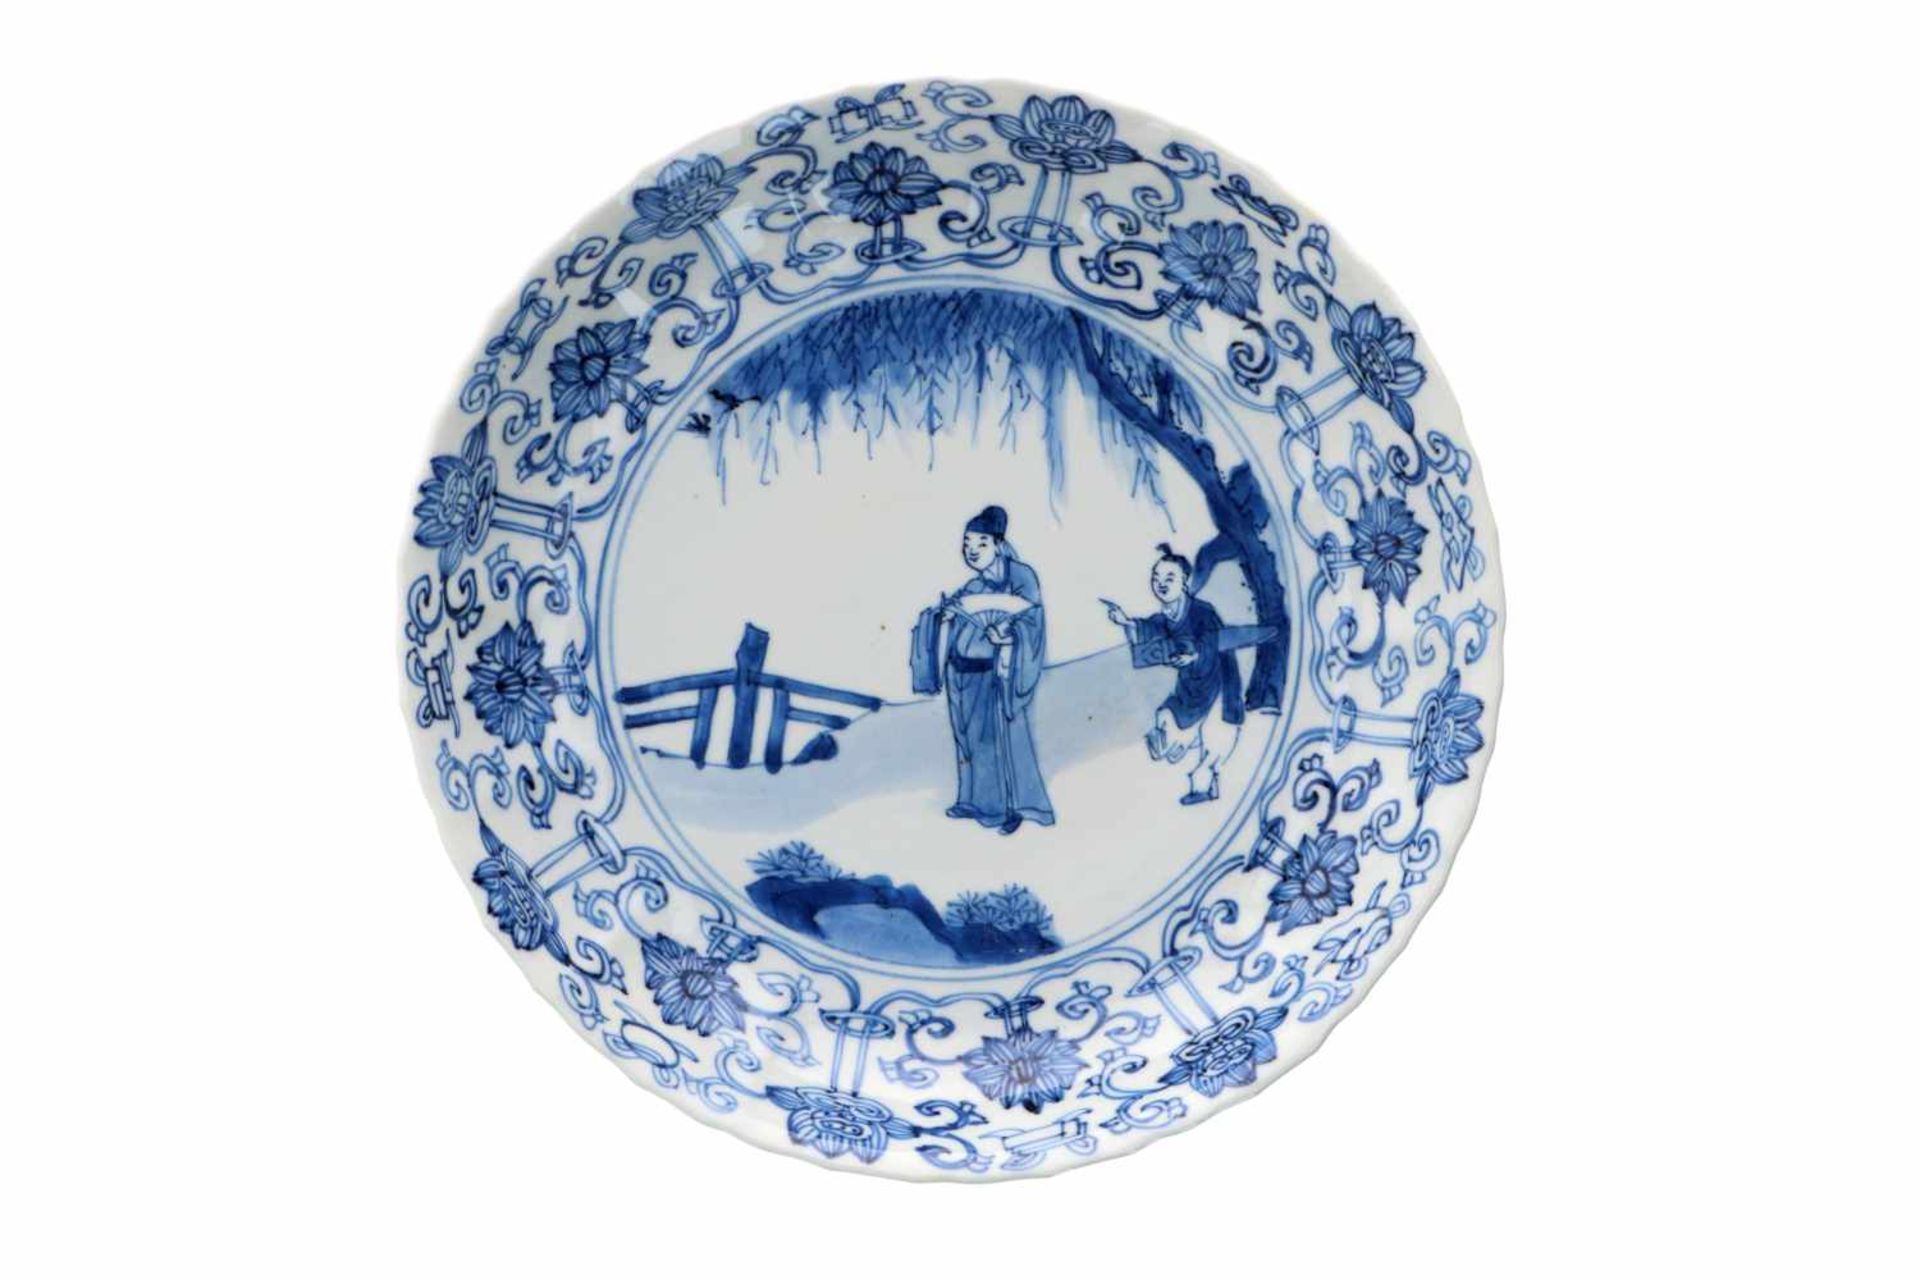 A lobed blue and white porcelain deep dish with scalloped rim, decorated with a dignitary and